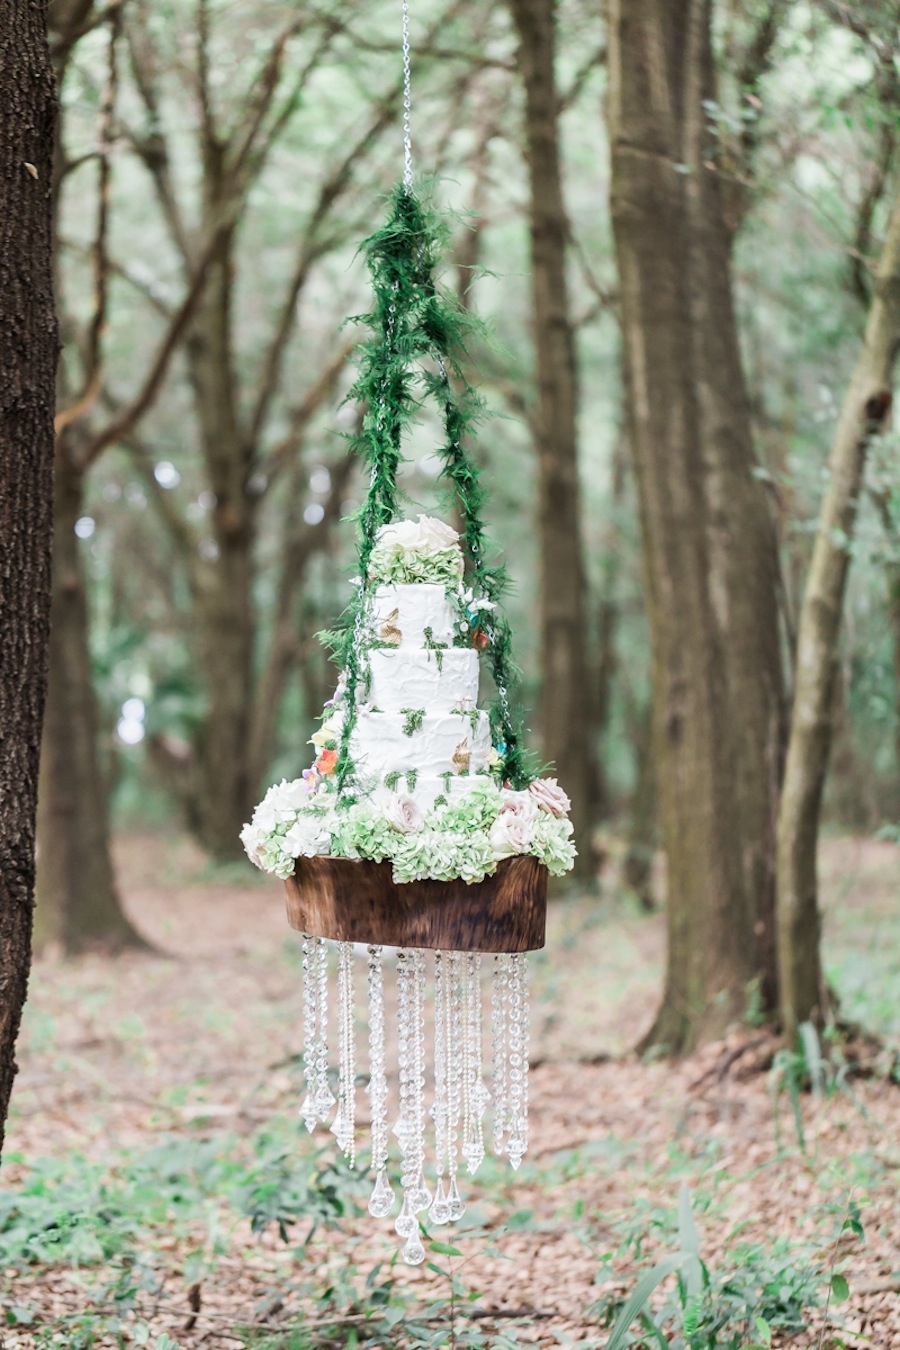 Suspended Hanging Wedding Cake in Woods | Tampa Wedding Planner Pea to Tree Events